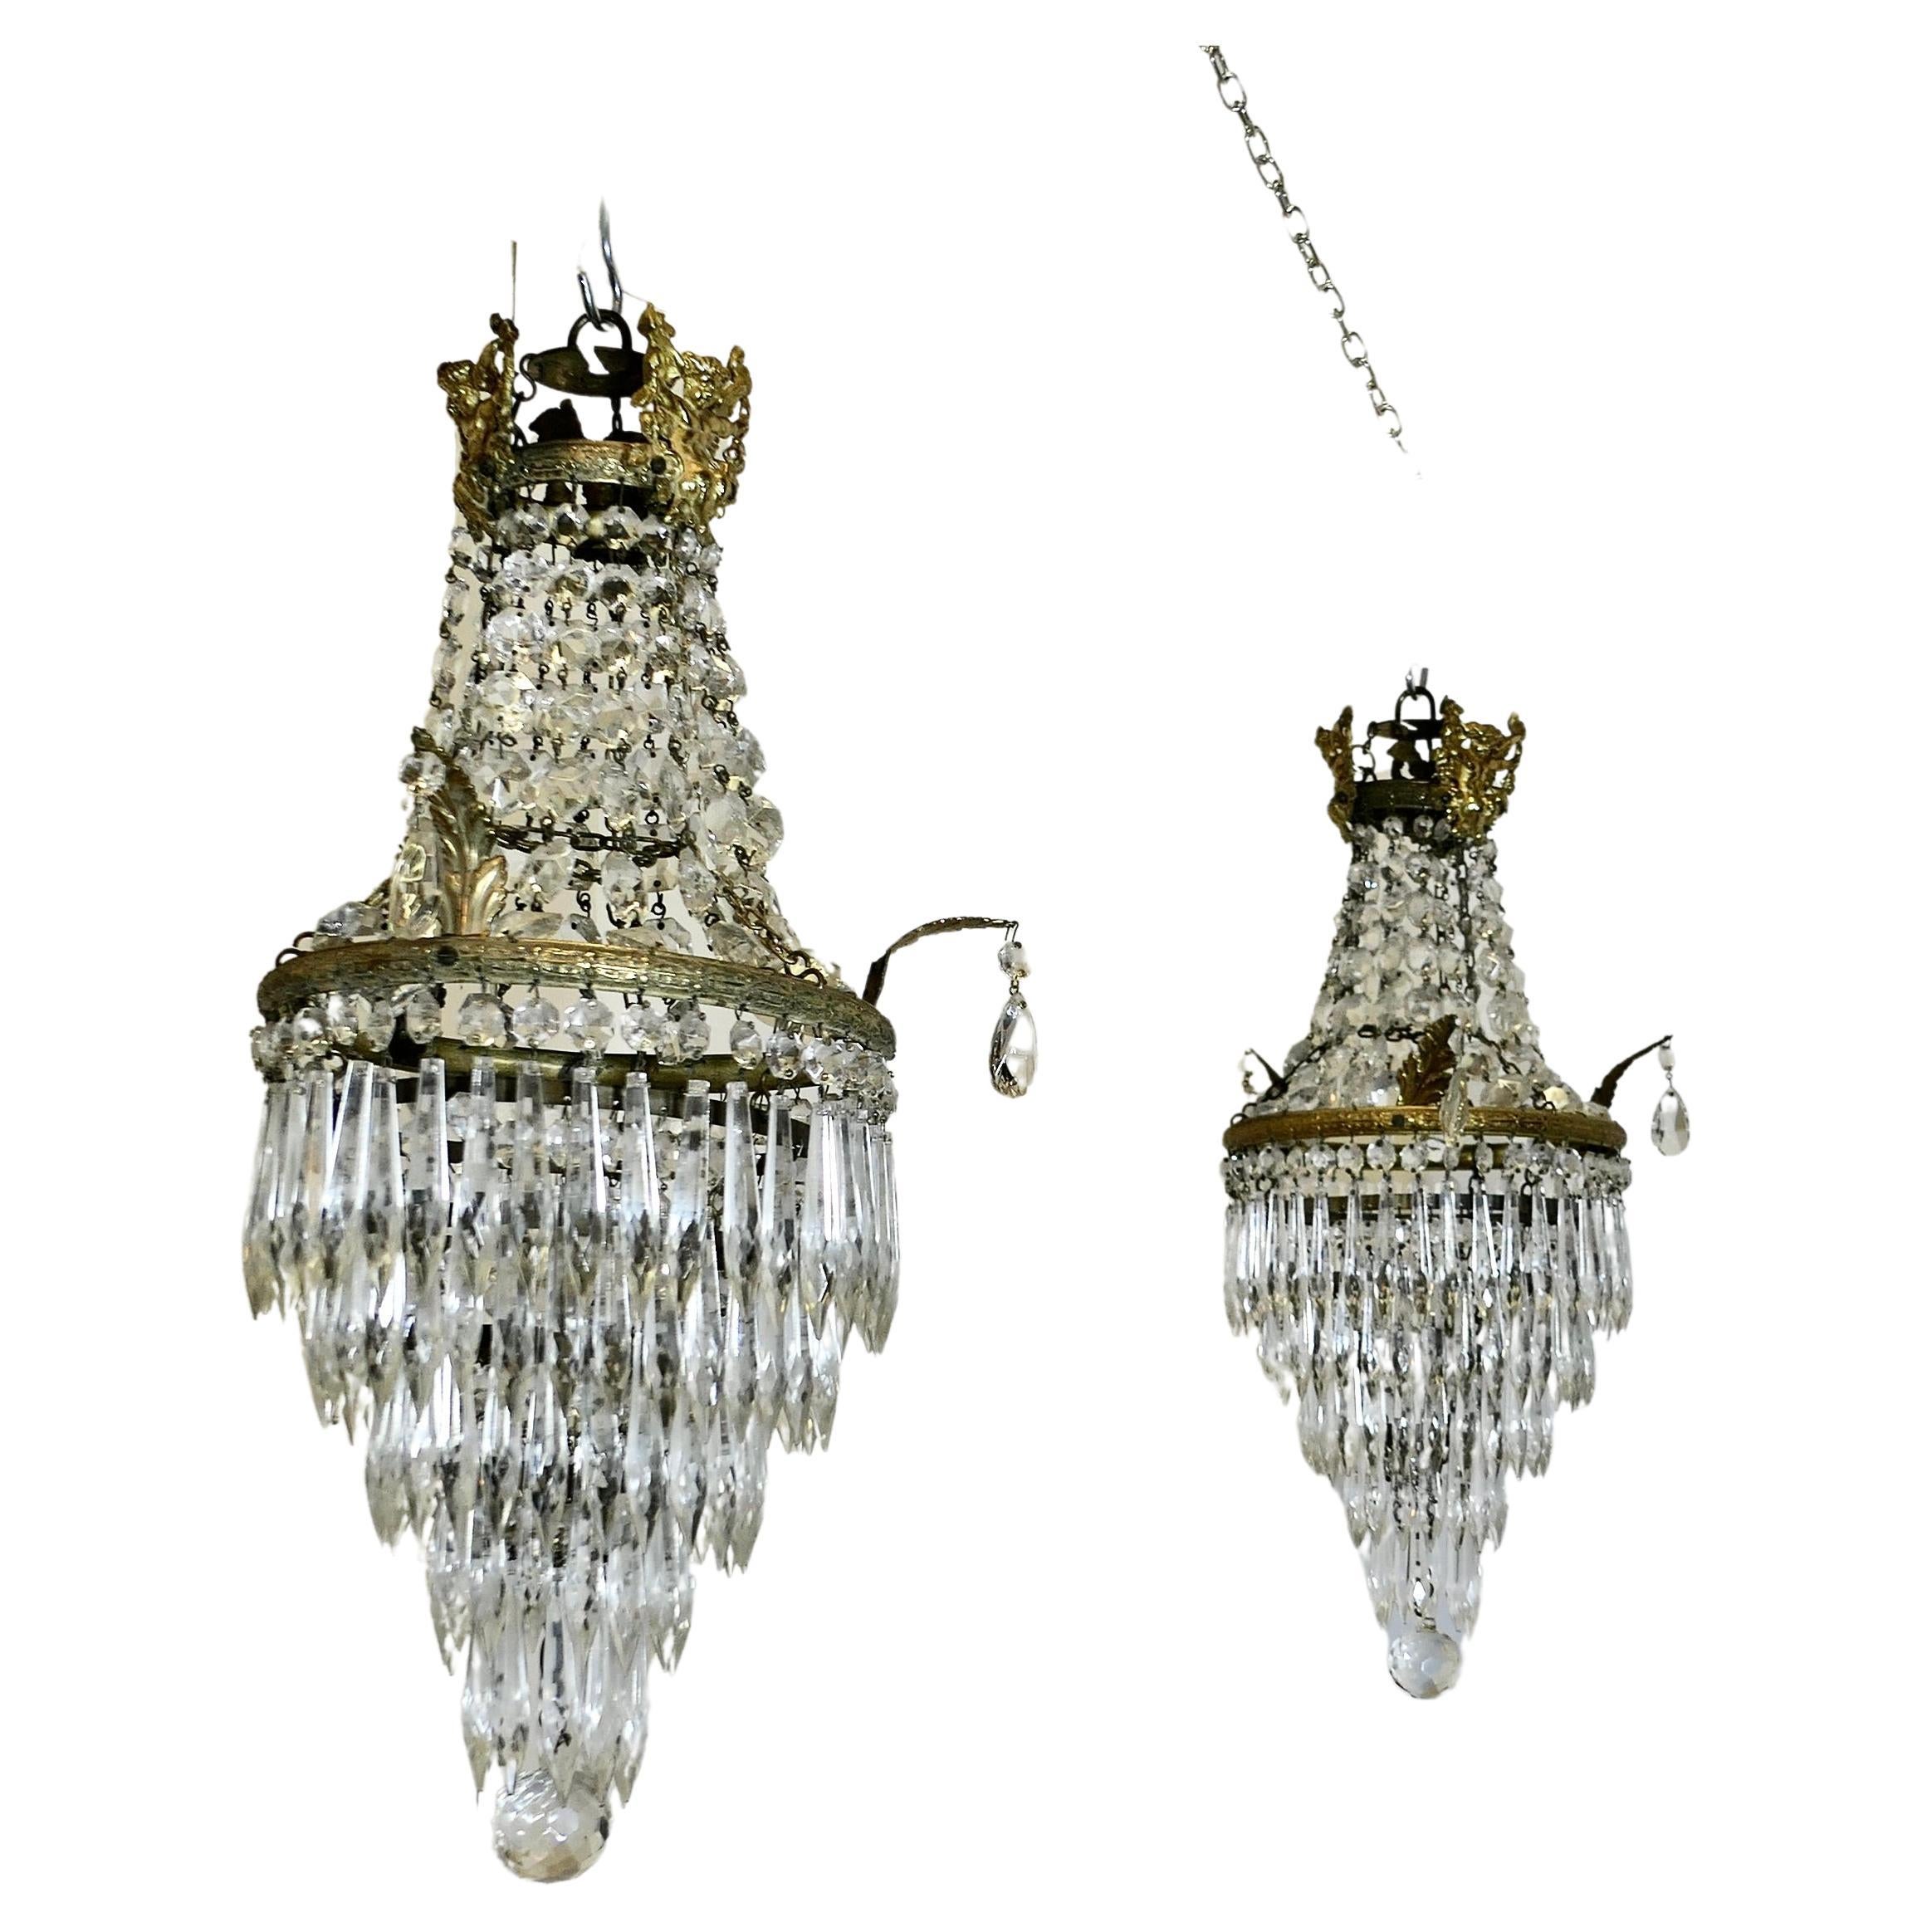 A Pair of French Empire Style Tent and Waterfall Chandeliers For Sale